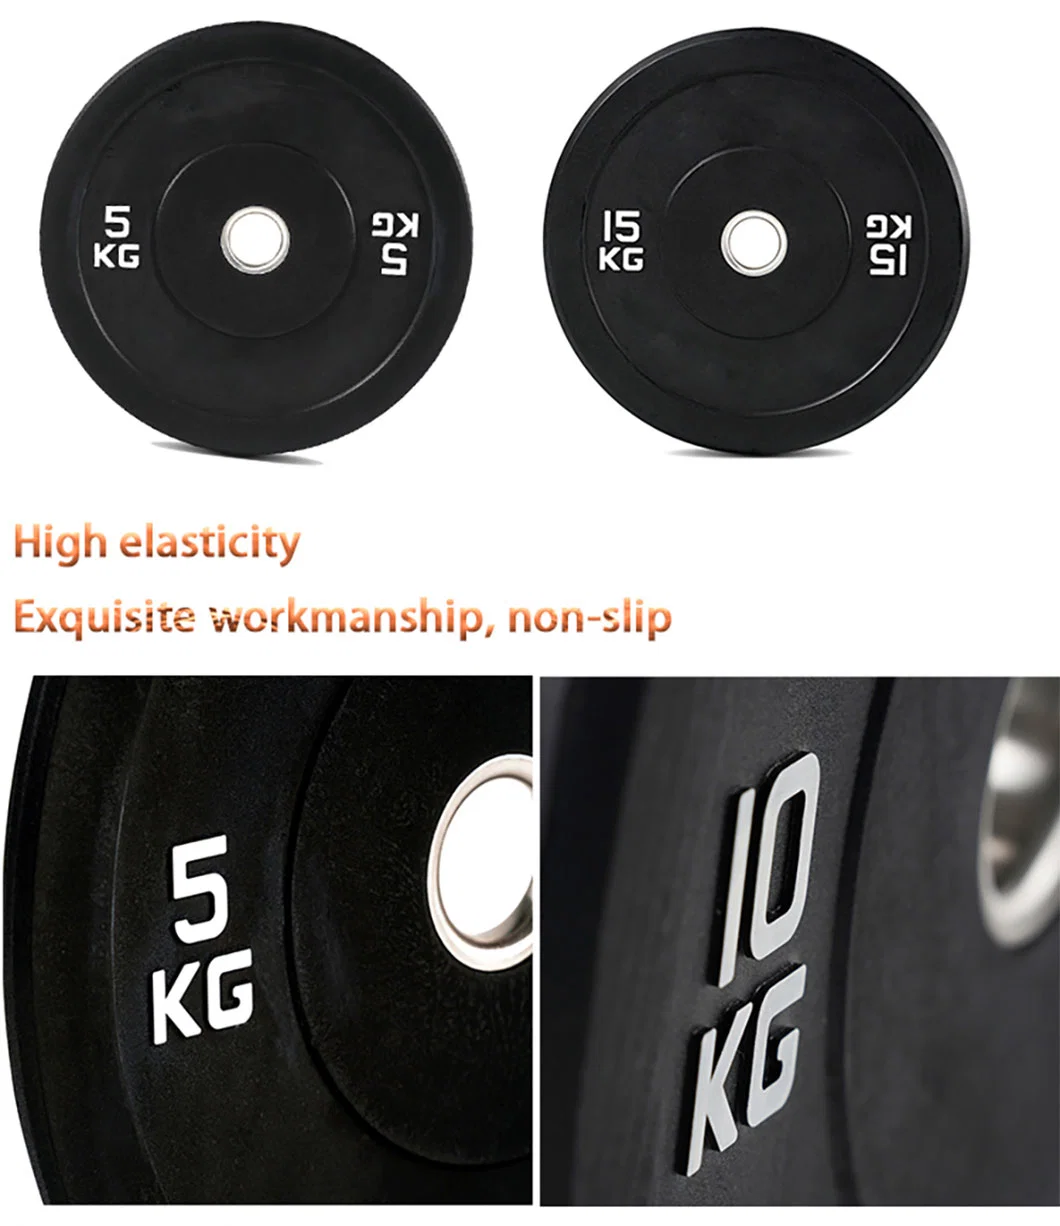 Bumper Plates Gym Home Barbell Rubber Weight Plates Black Rubber Weight Lifting Fitness Exercise Equipment Accessory